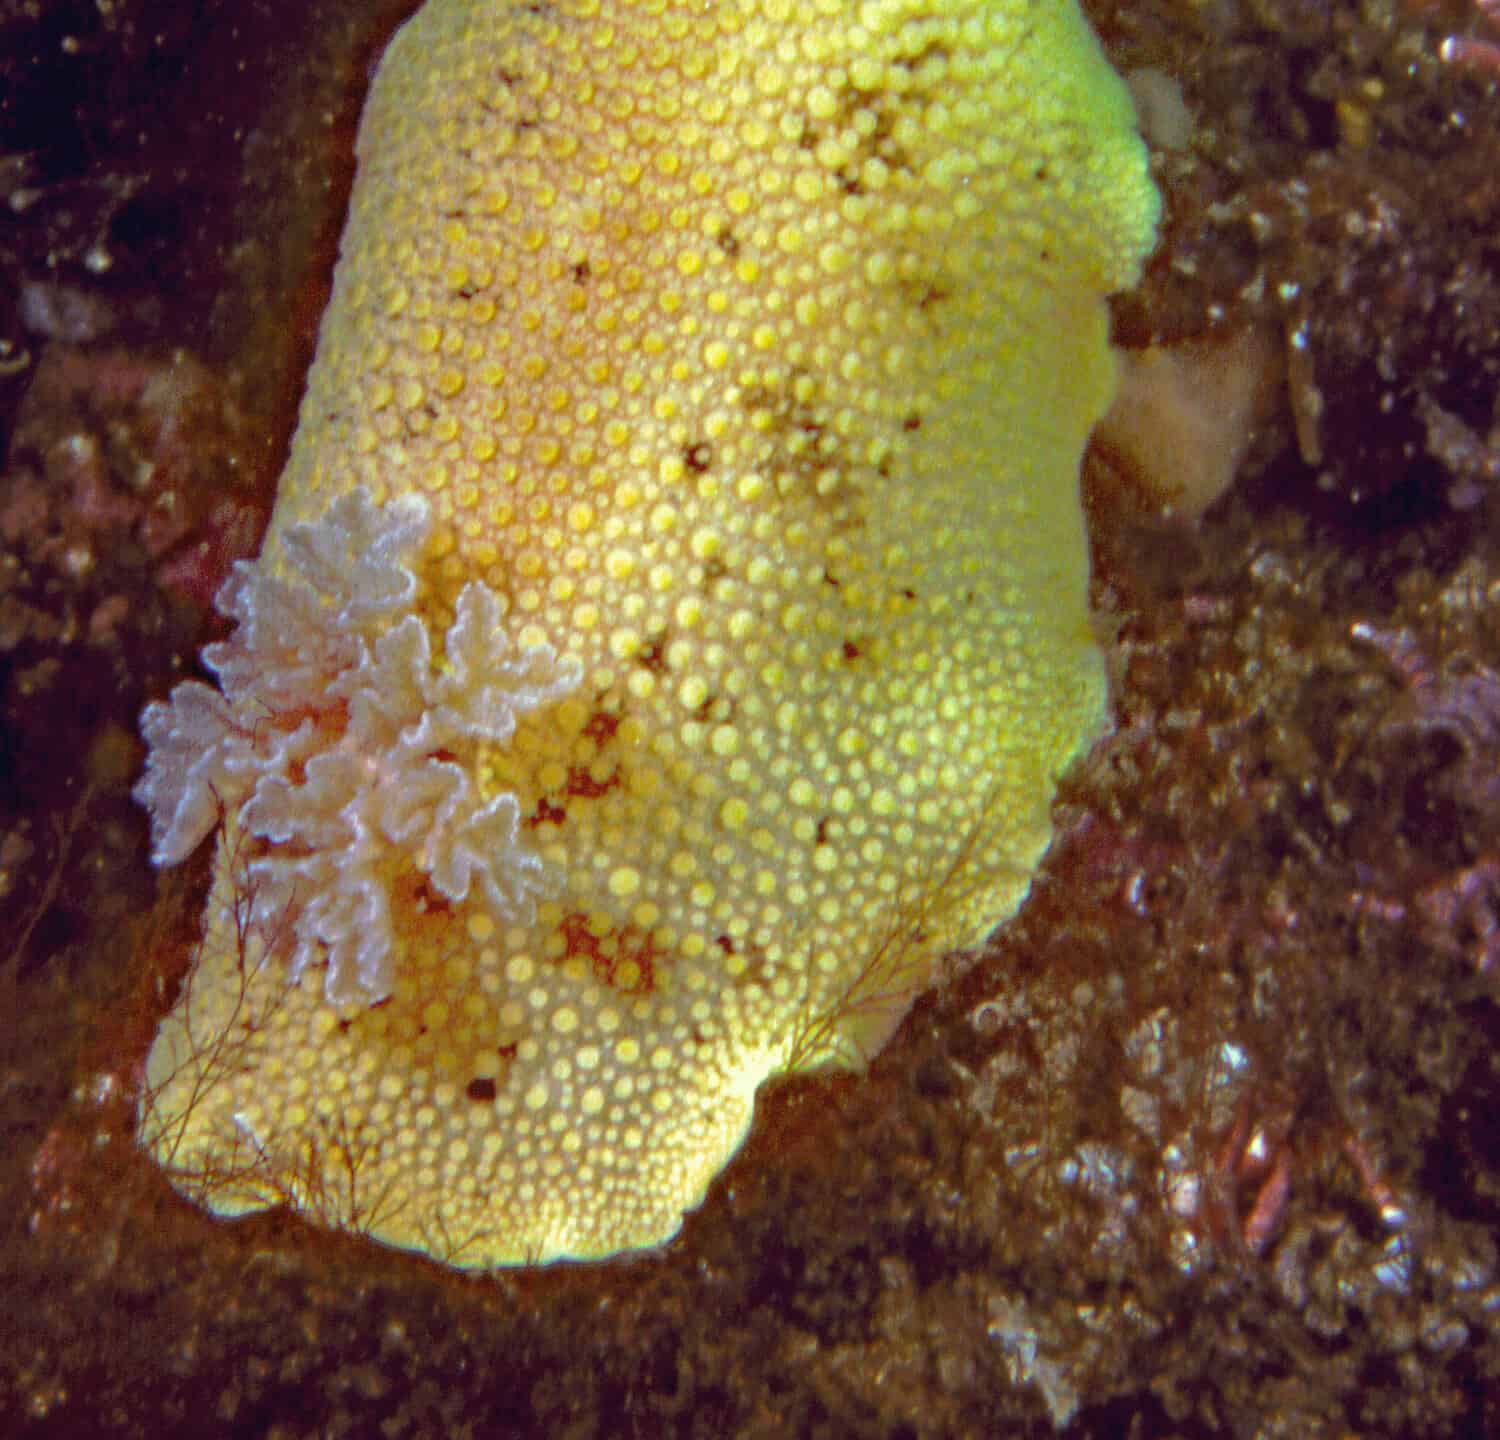 Peltodoris nobilis, the beautiful sea lemon nudibranch, so-called because of its yellow coloration, and a citrus odor when handled out of the water, eats sponges, mostly Mycale adhaerens.  